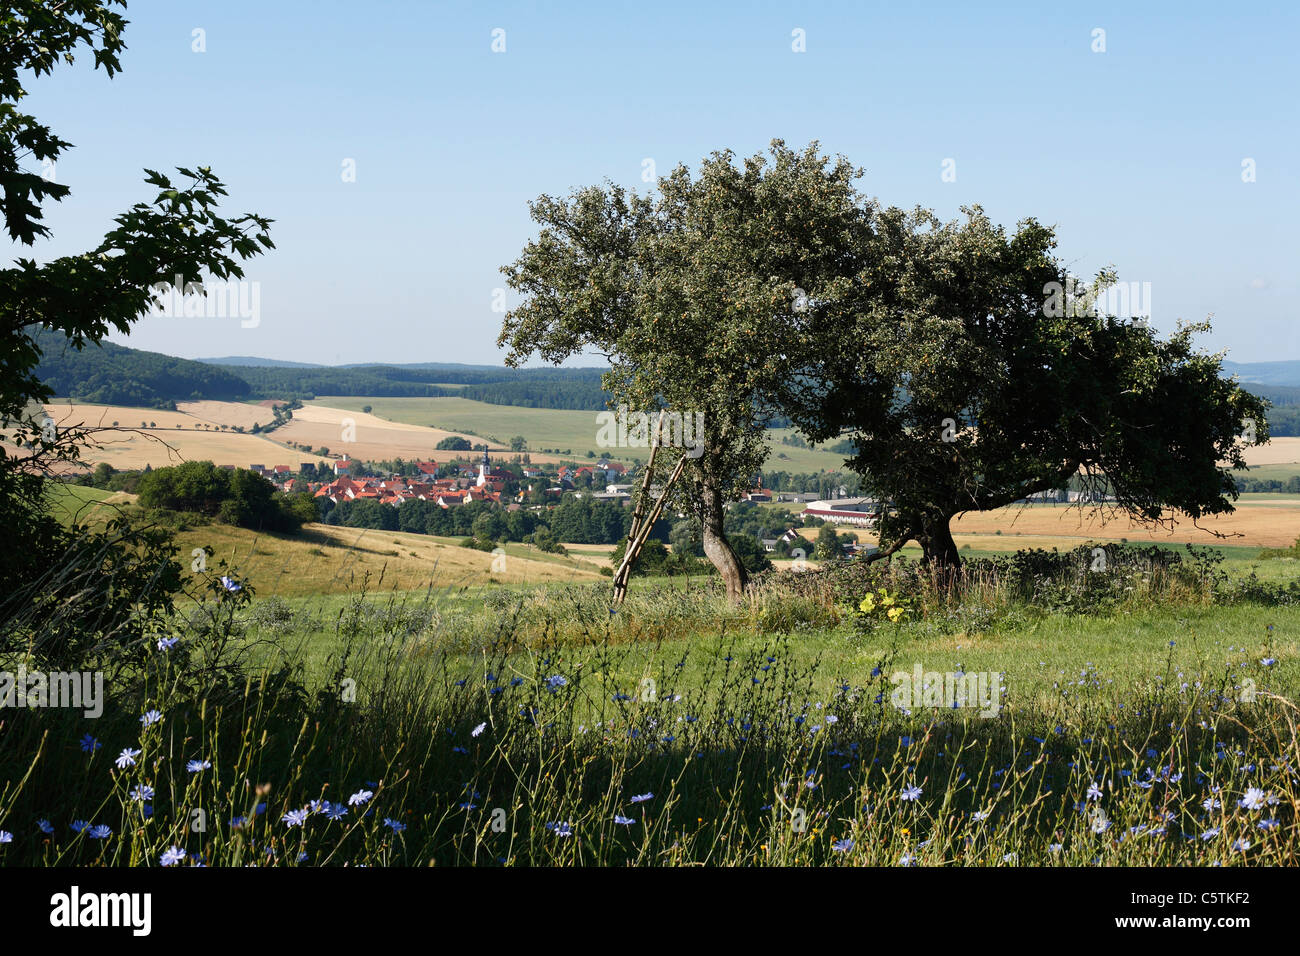 Germany, Thuringia, Rhoen, Rhoenblick, Helmershausen, View of buildings with mountains Stock Photo